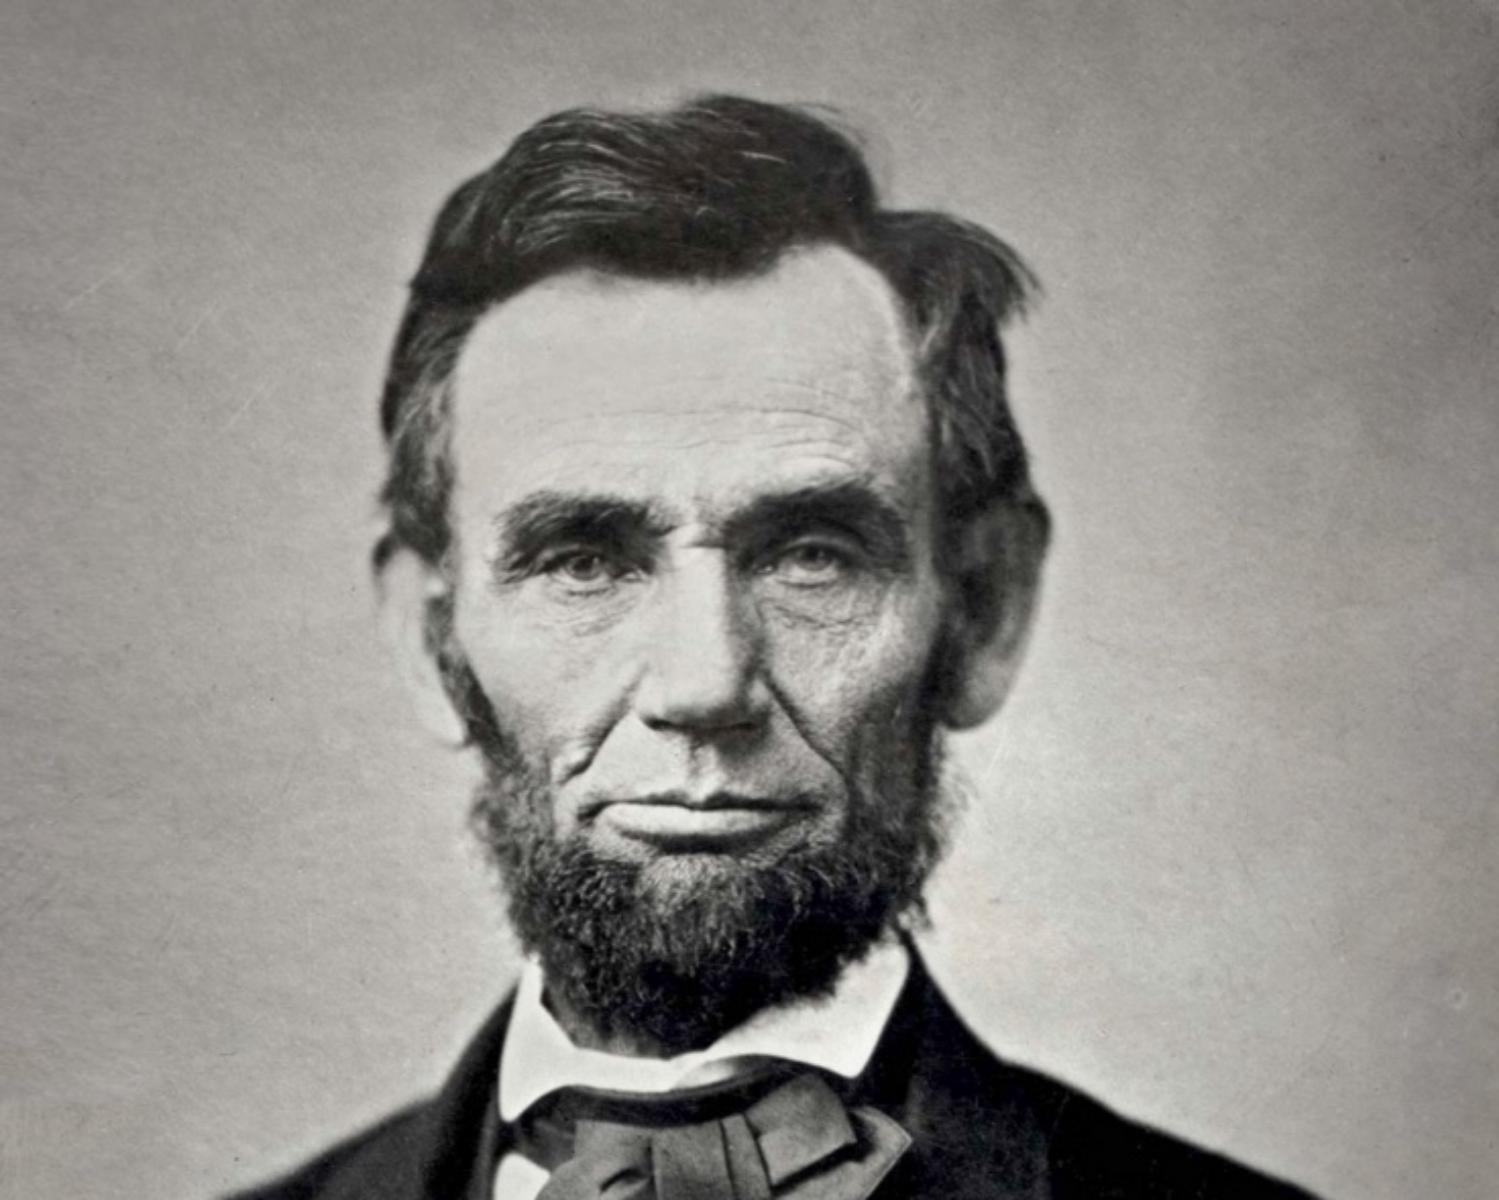 THE GREAT AMERICAN PRESIDENT  ABRAHAM LINCOLN A.K.A 'HONEST ABE'